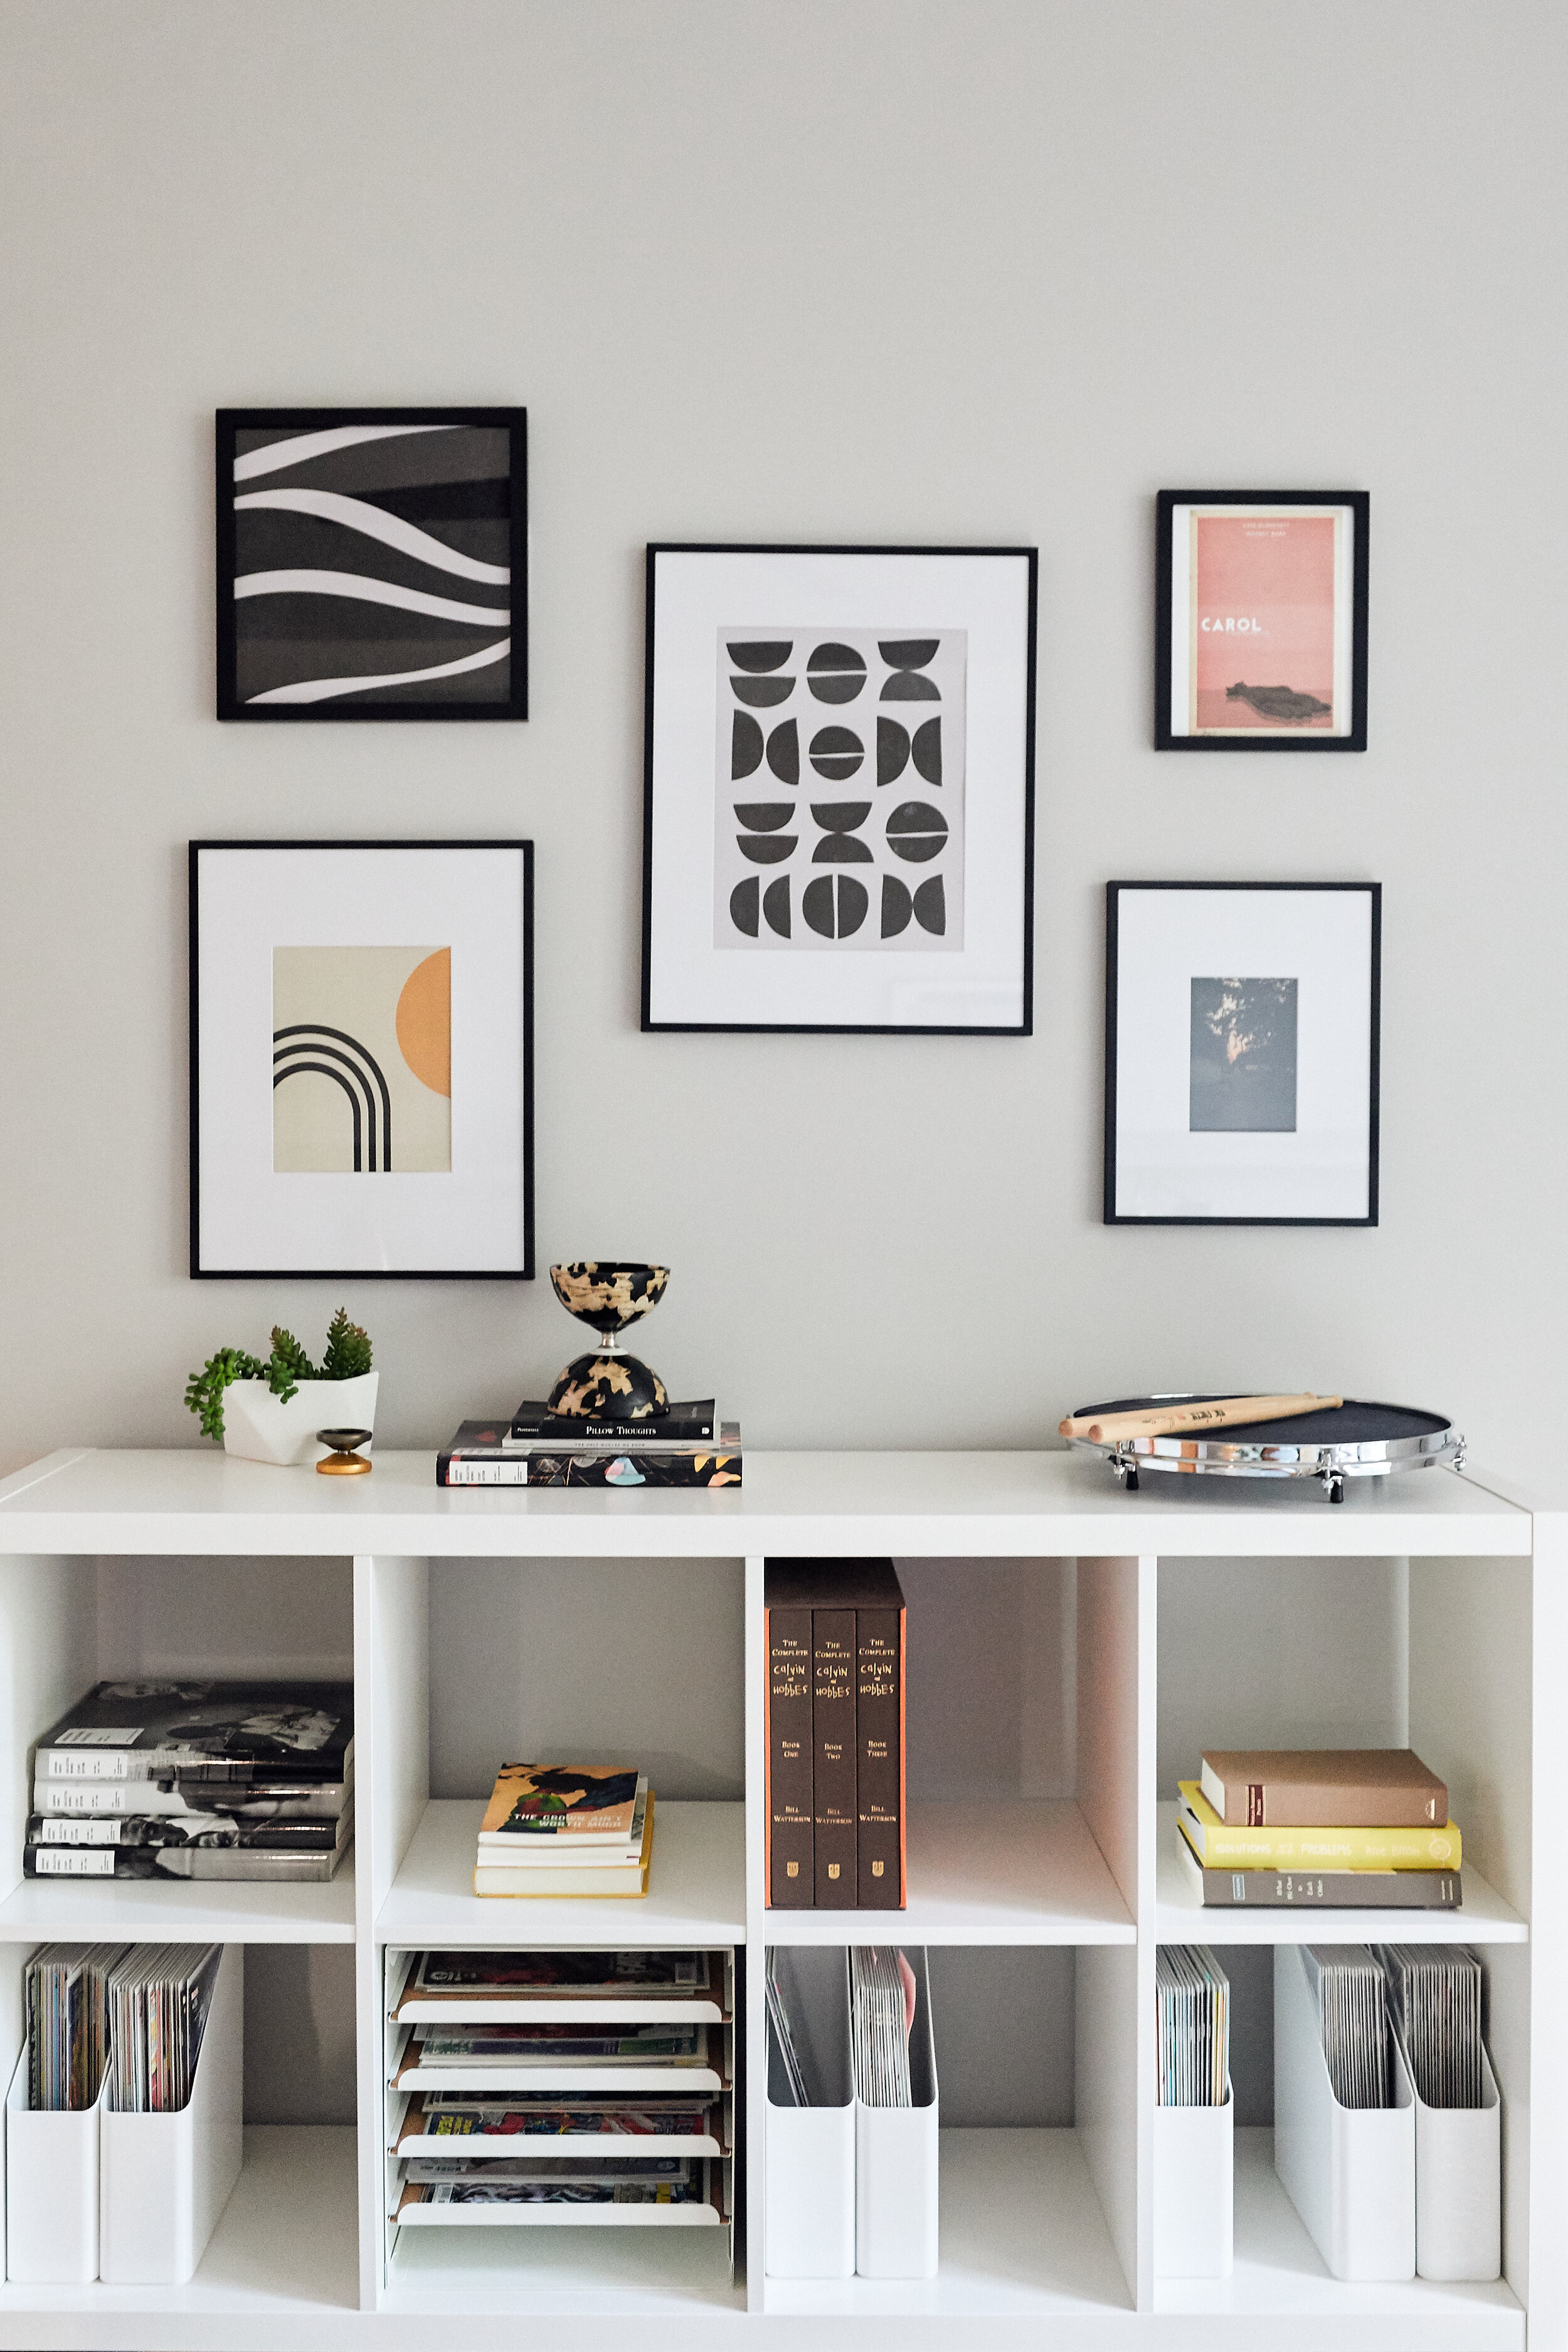 Photo by Canary Gray for HGTV. Sources: metal furniture legs, picture frames, Etsy downloadable art coral pink carol print, neutral abstract prints, and neutral geometric print